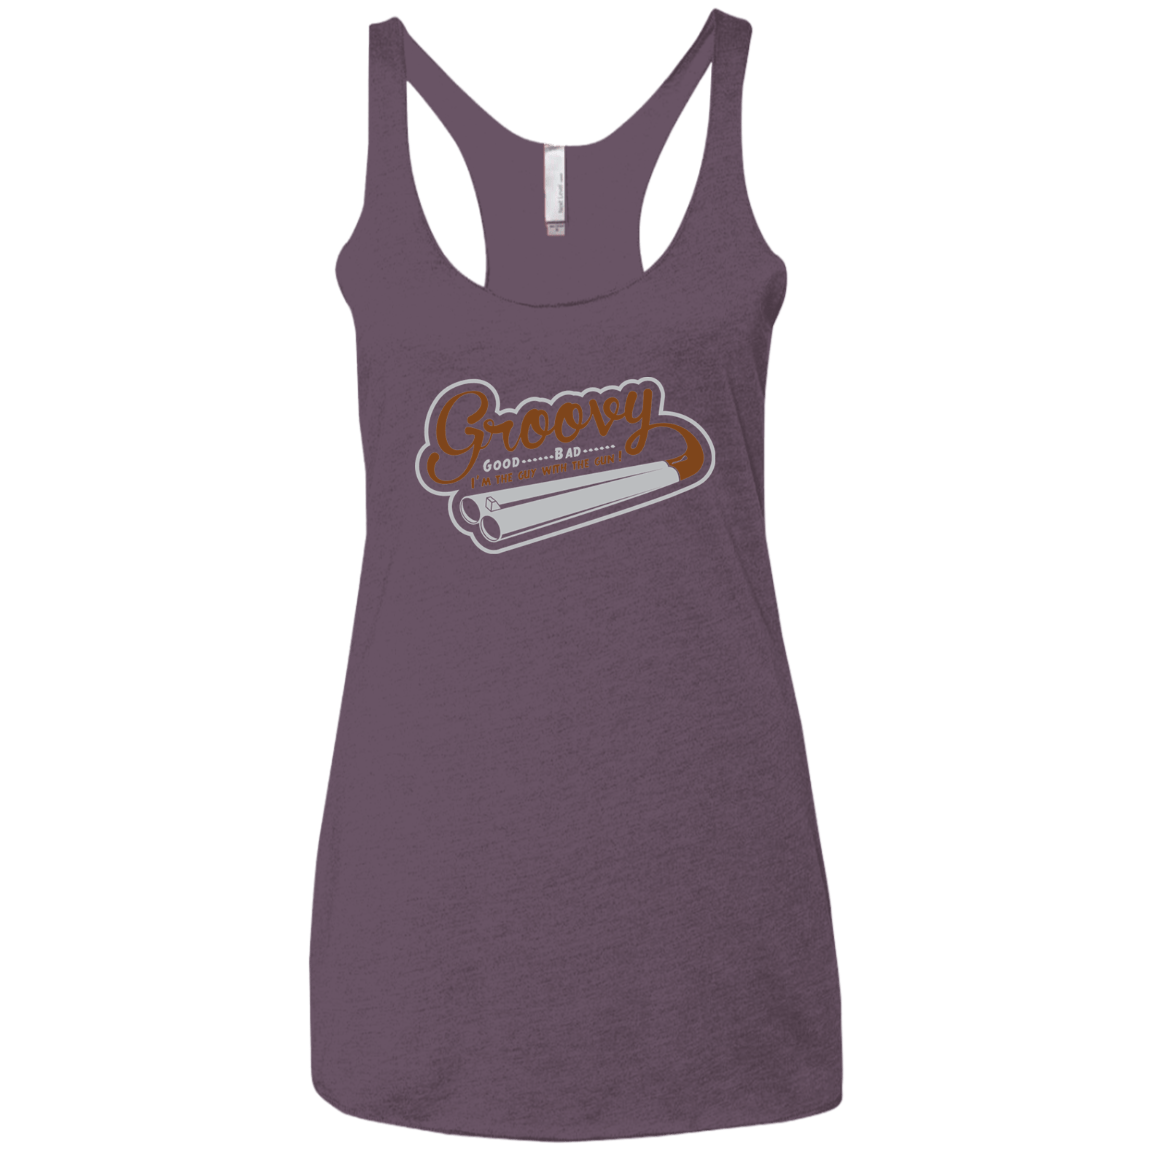 T-Shirts Vintage Purple / X-Small The Guy With The Gun Women's Triblend Racerback Tank